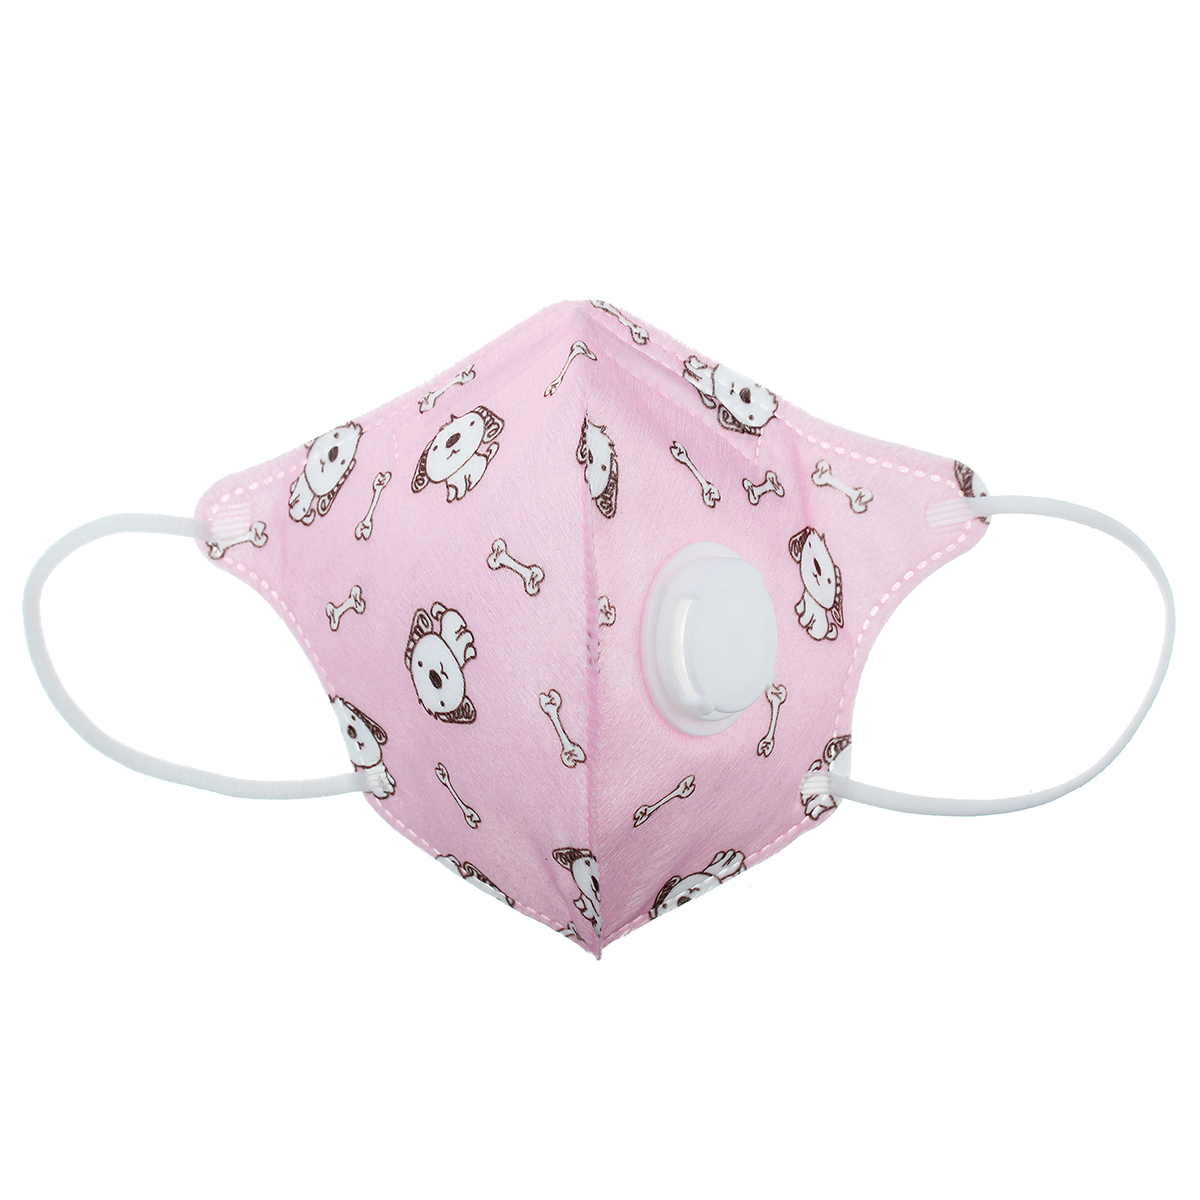 Kids-Anti-PM25-Dust-Proof-Breathable-Face-Mask-Disposable-Protective-Mask-Cute-Printed-Non-Woven-Mas-1659698-10